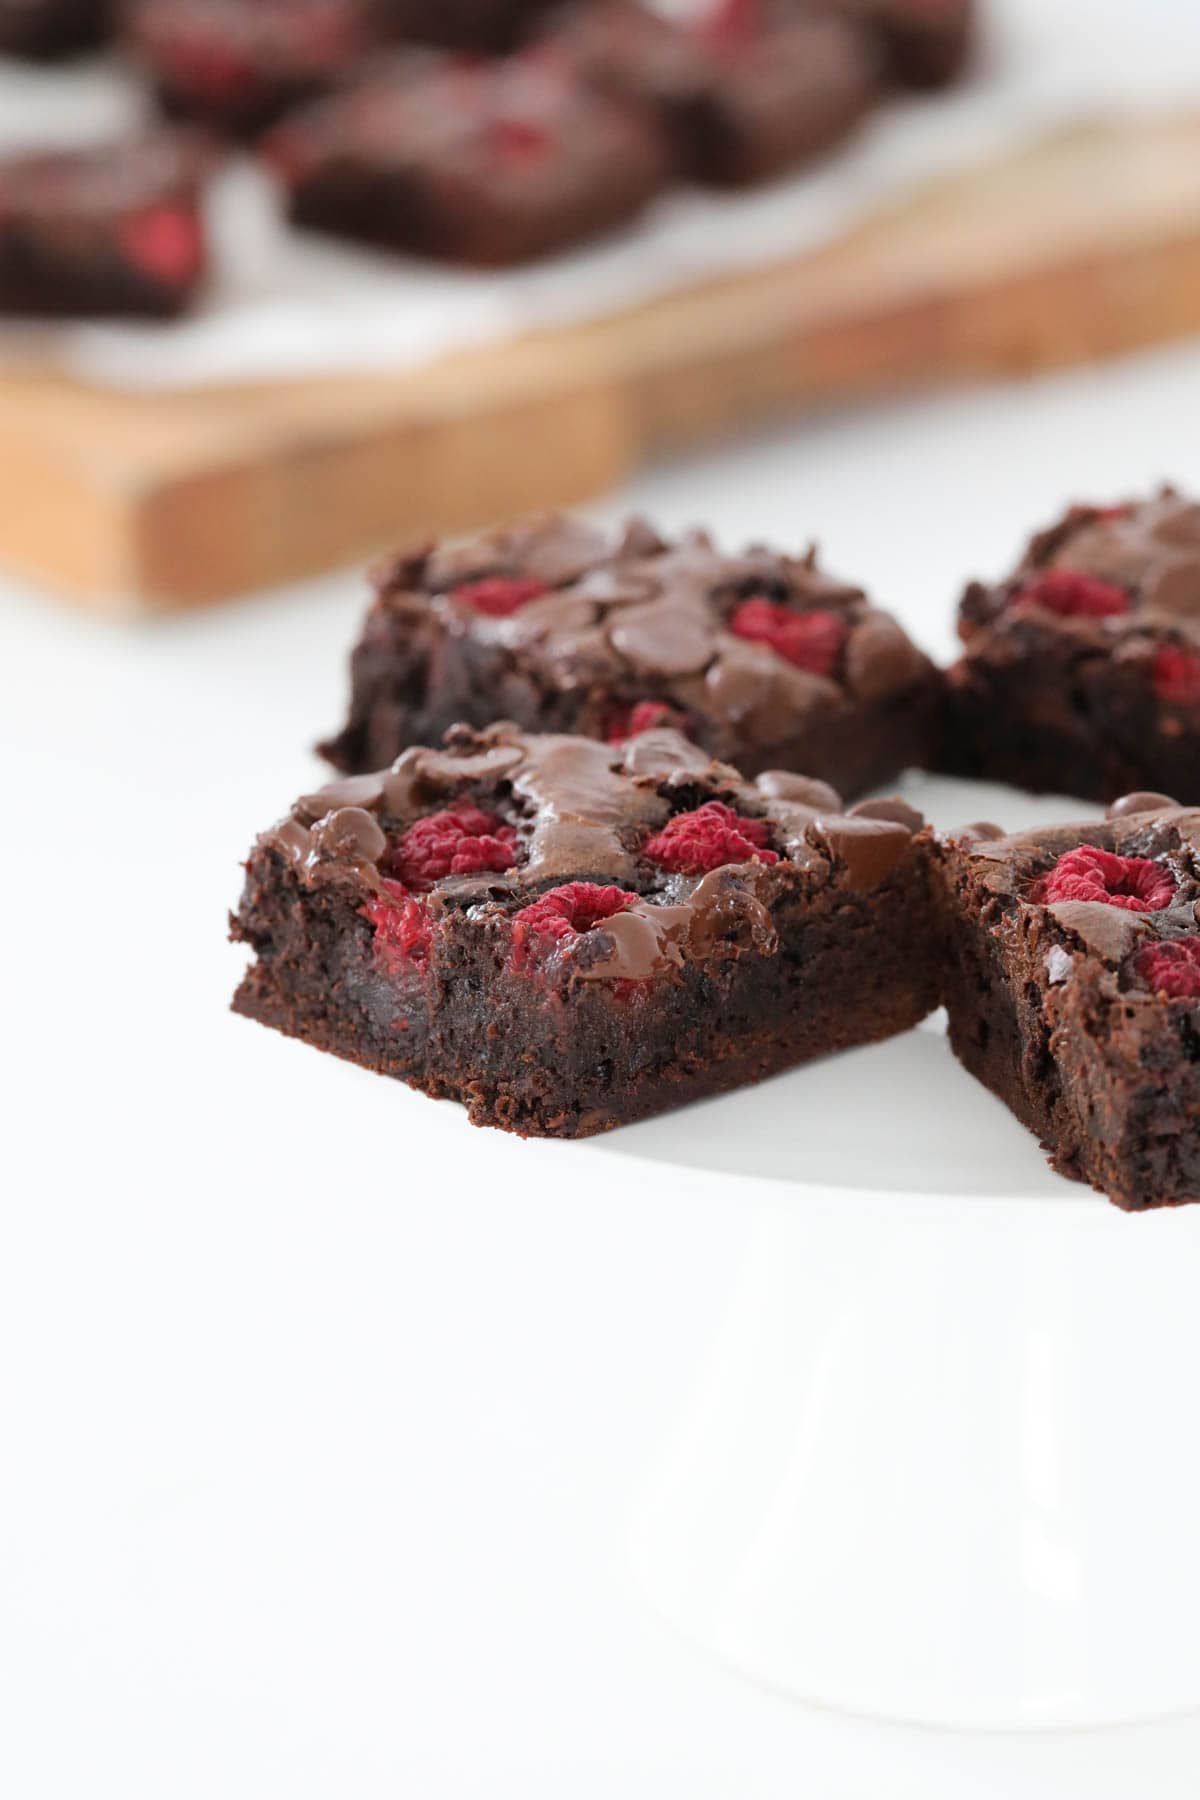 Raspberry brownie squares served on a plate.